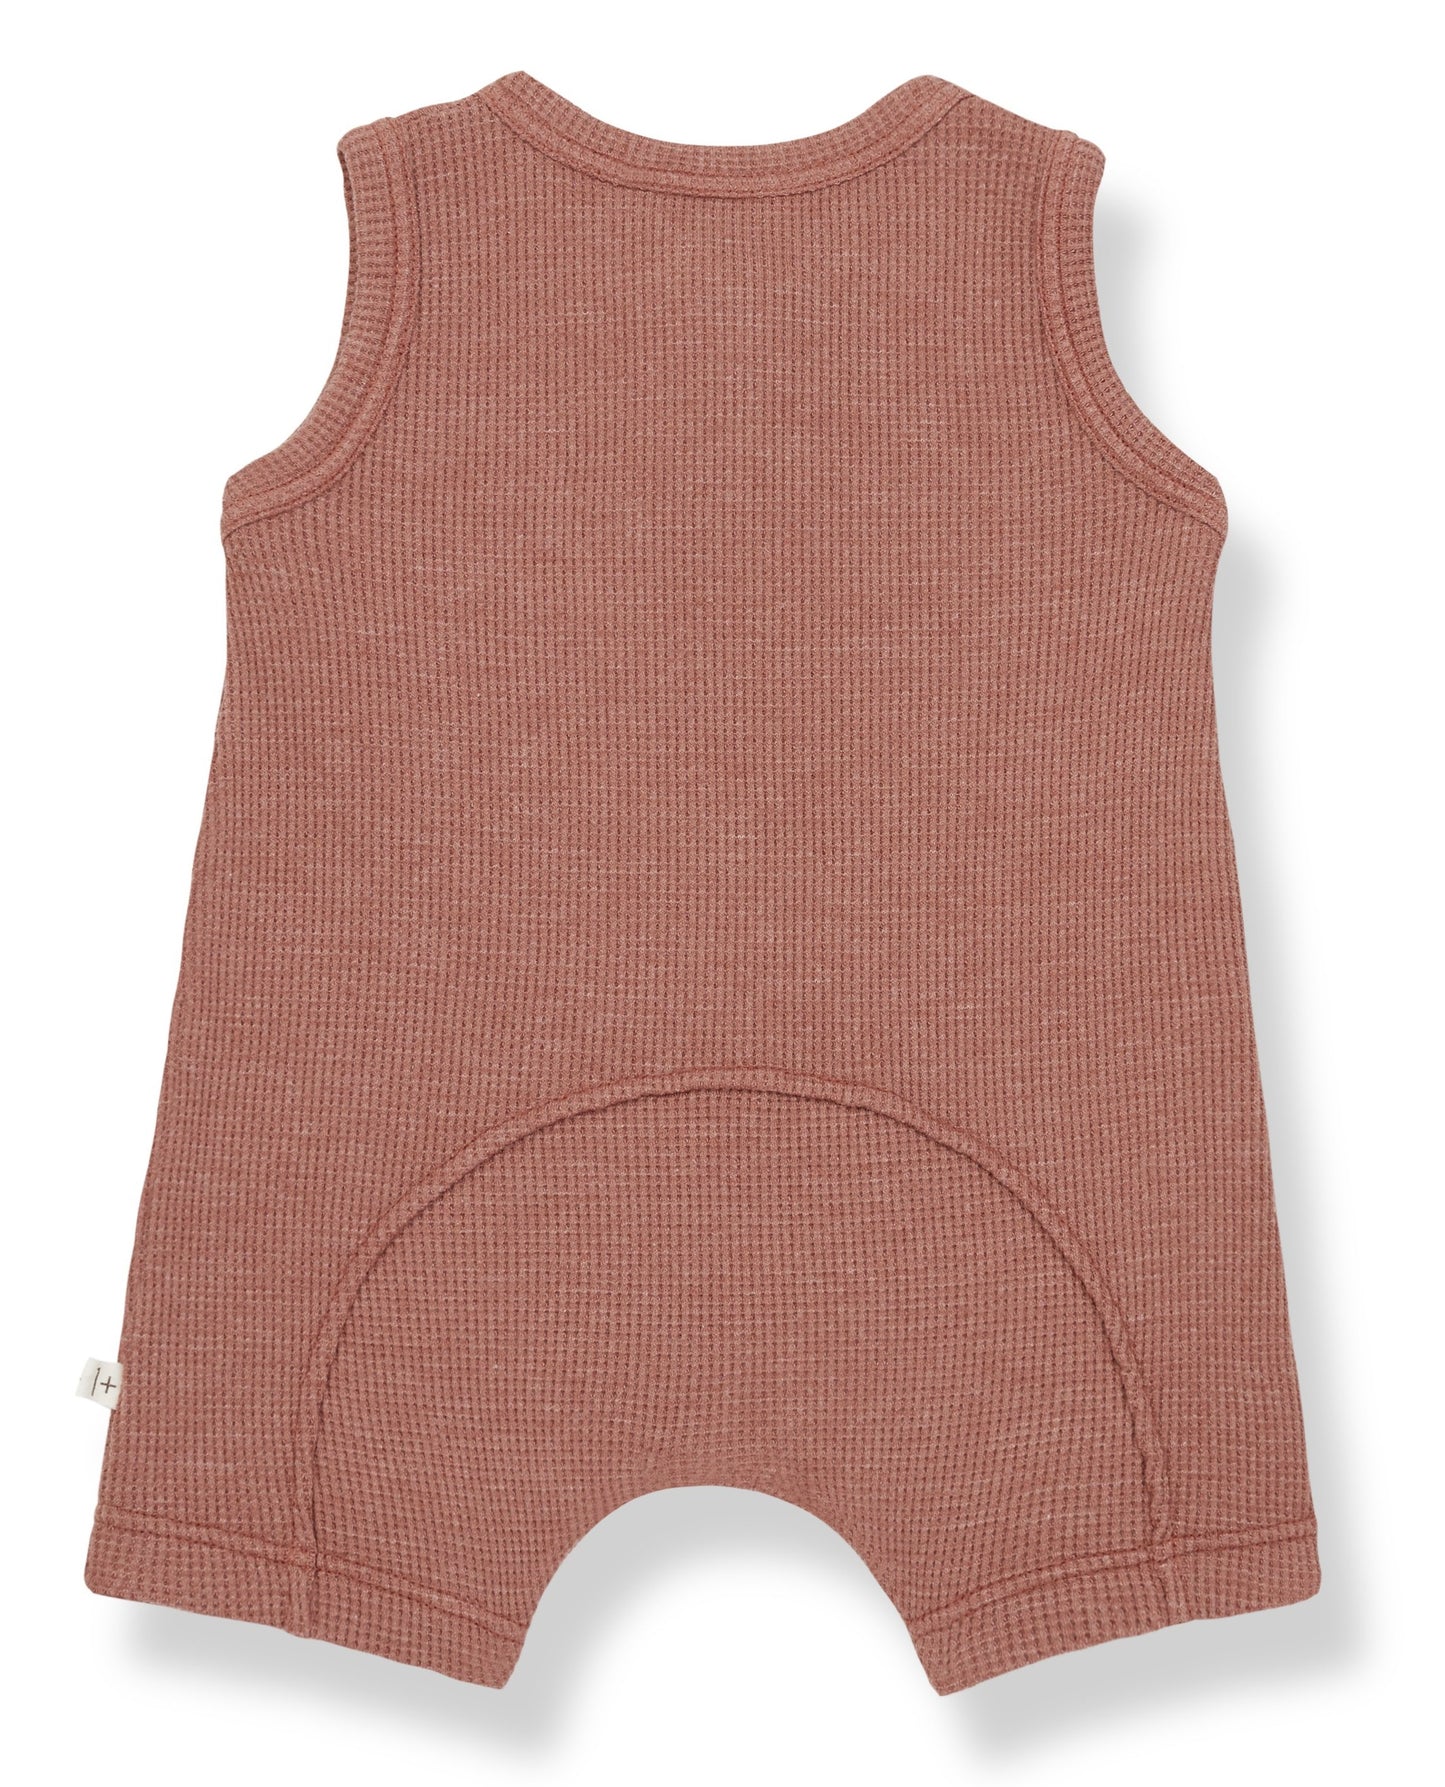 One + In the Family August Romper